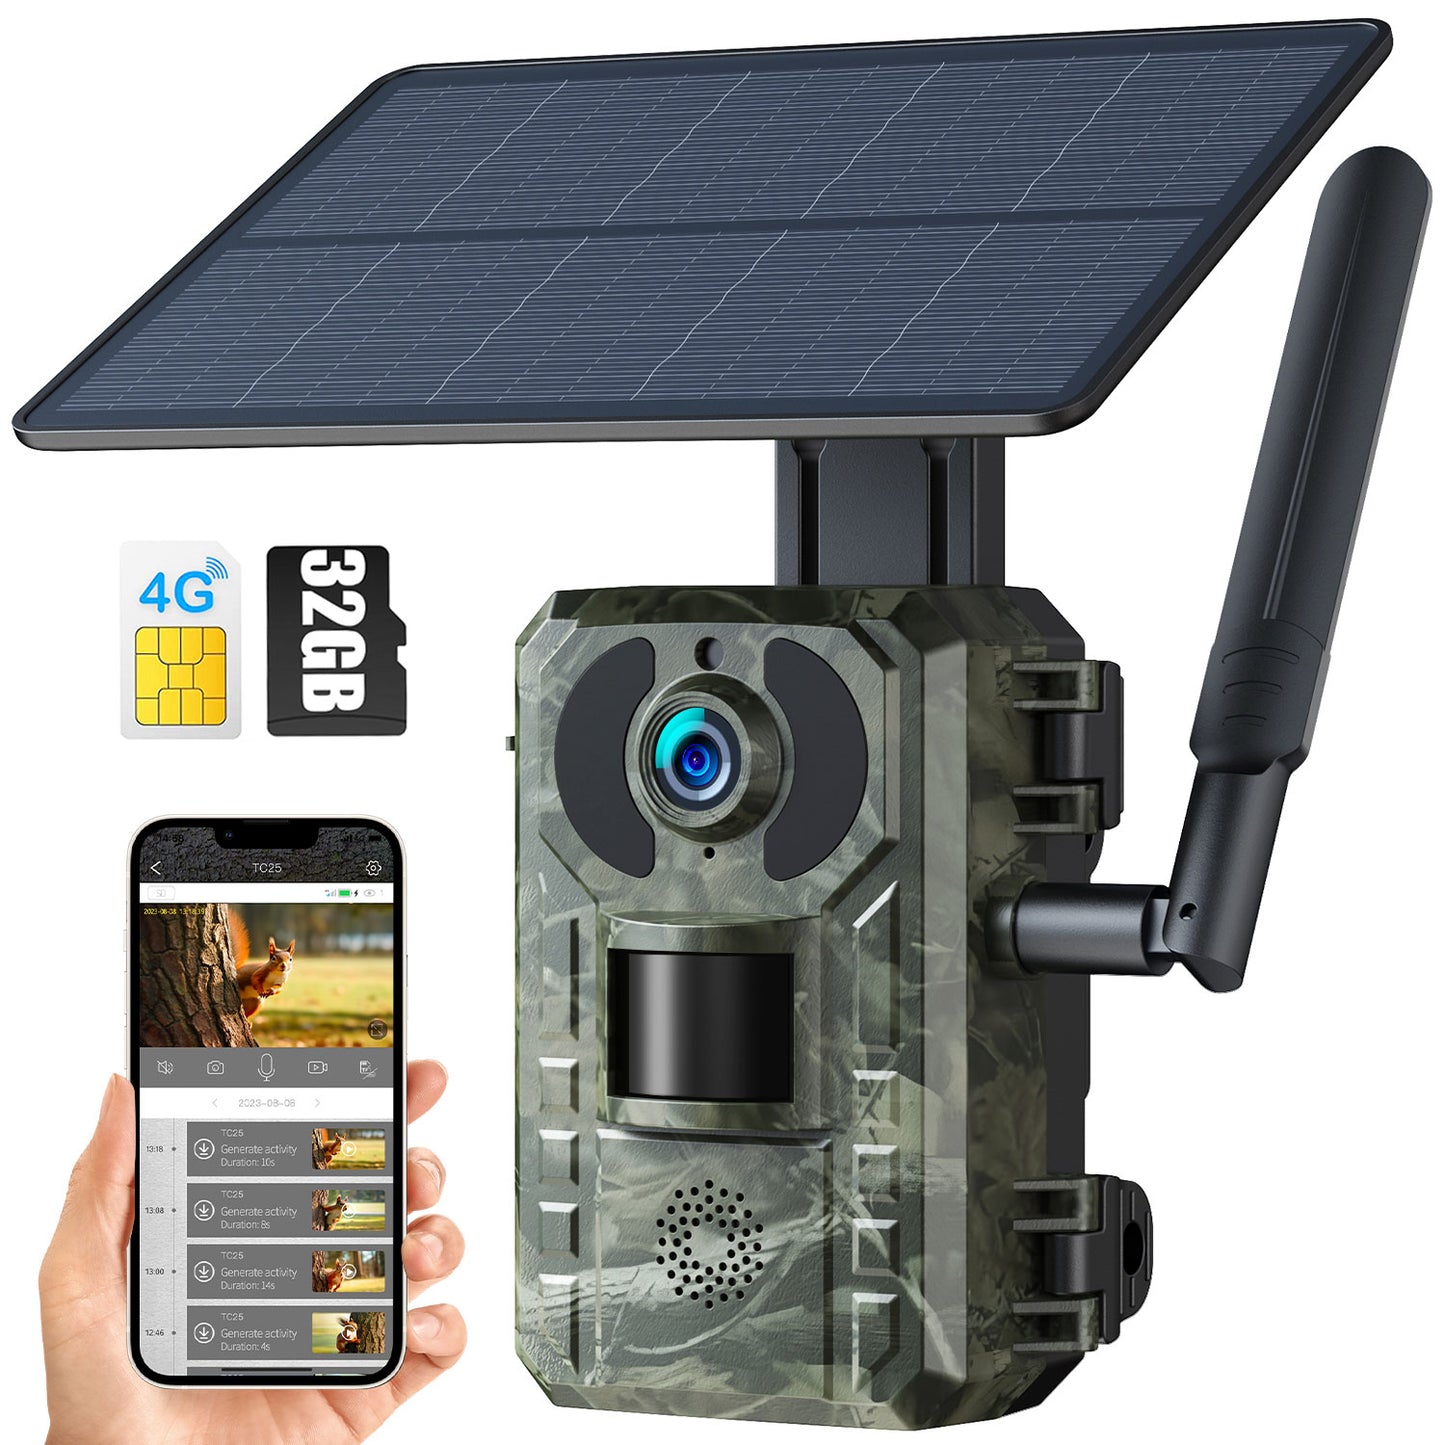 CAMPARK 4G Cellular Solar Trail Camera with SD Card, 2.5K 14MP Hunting Game Camera with Live View and Motion Alerts, 940nm No Glow Night Vision and IP66 Waterproof for Wildlife Monitoring